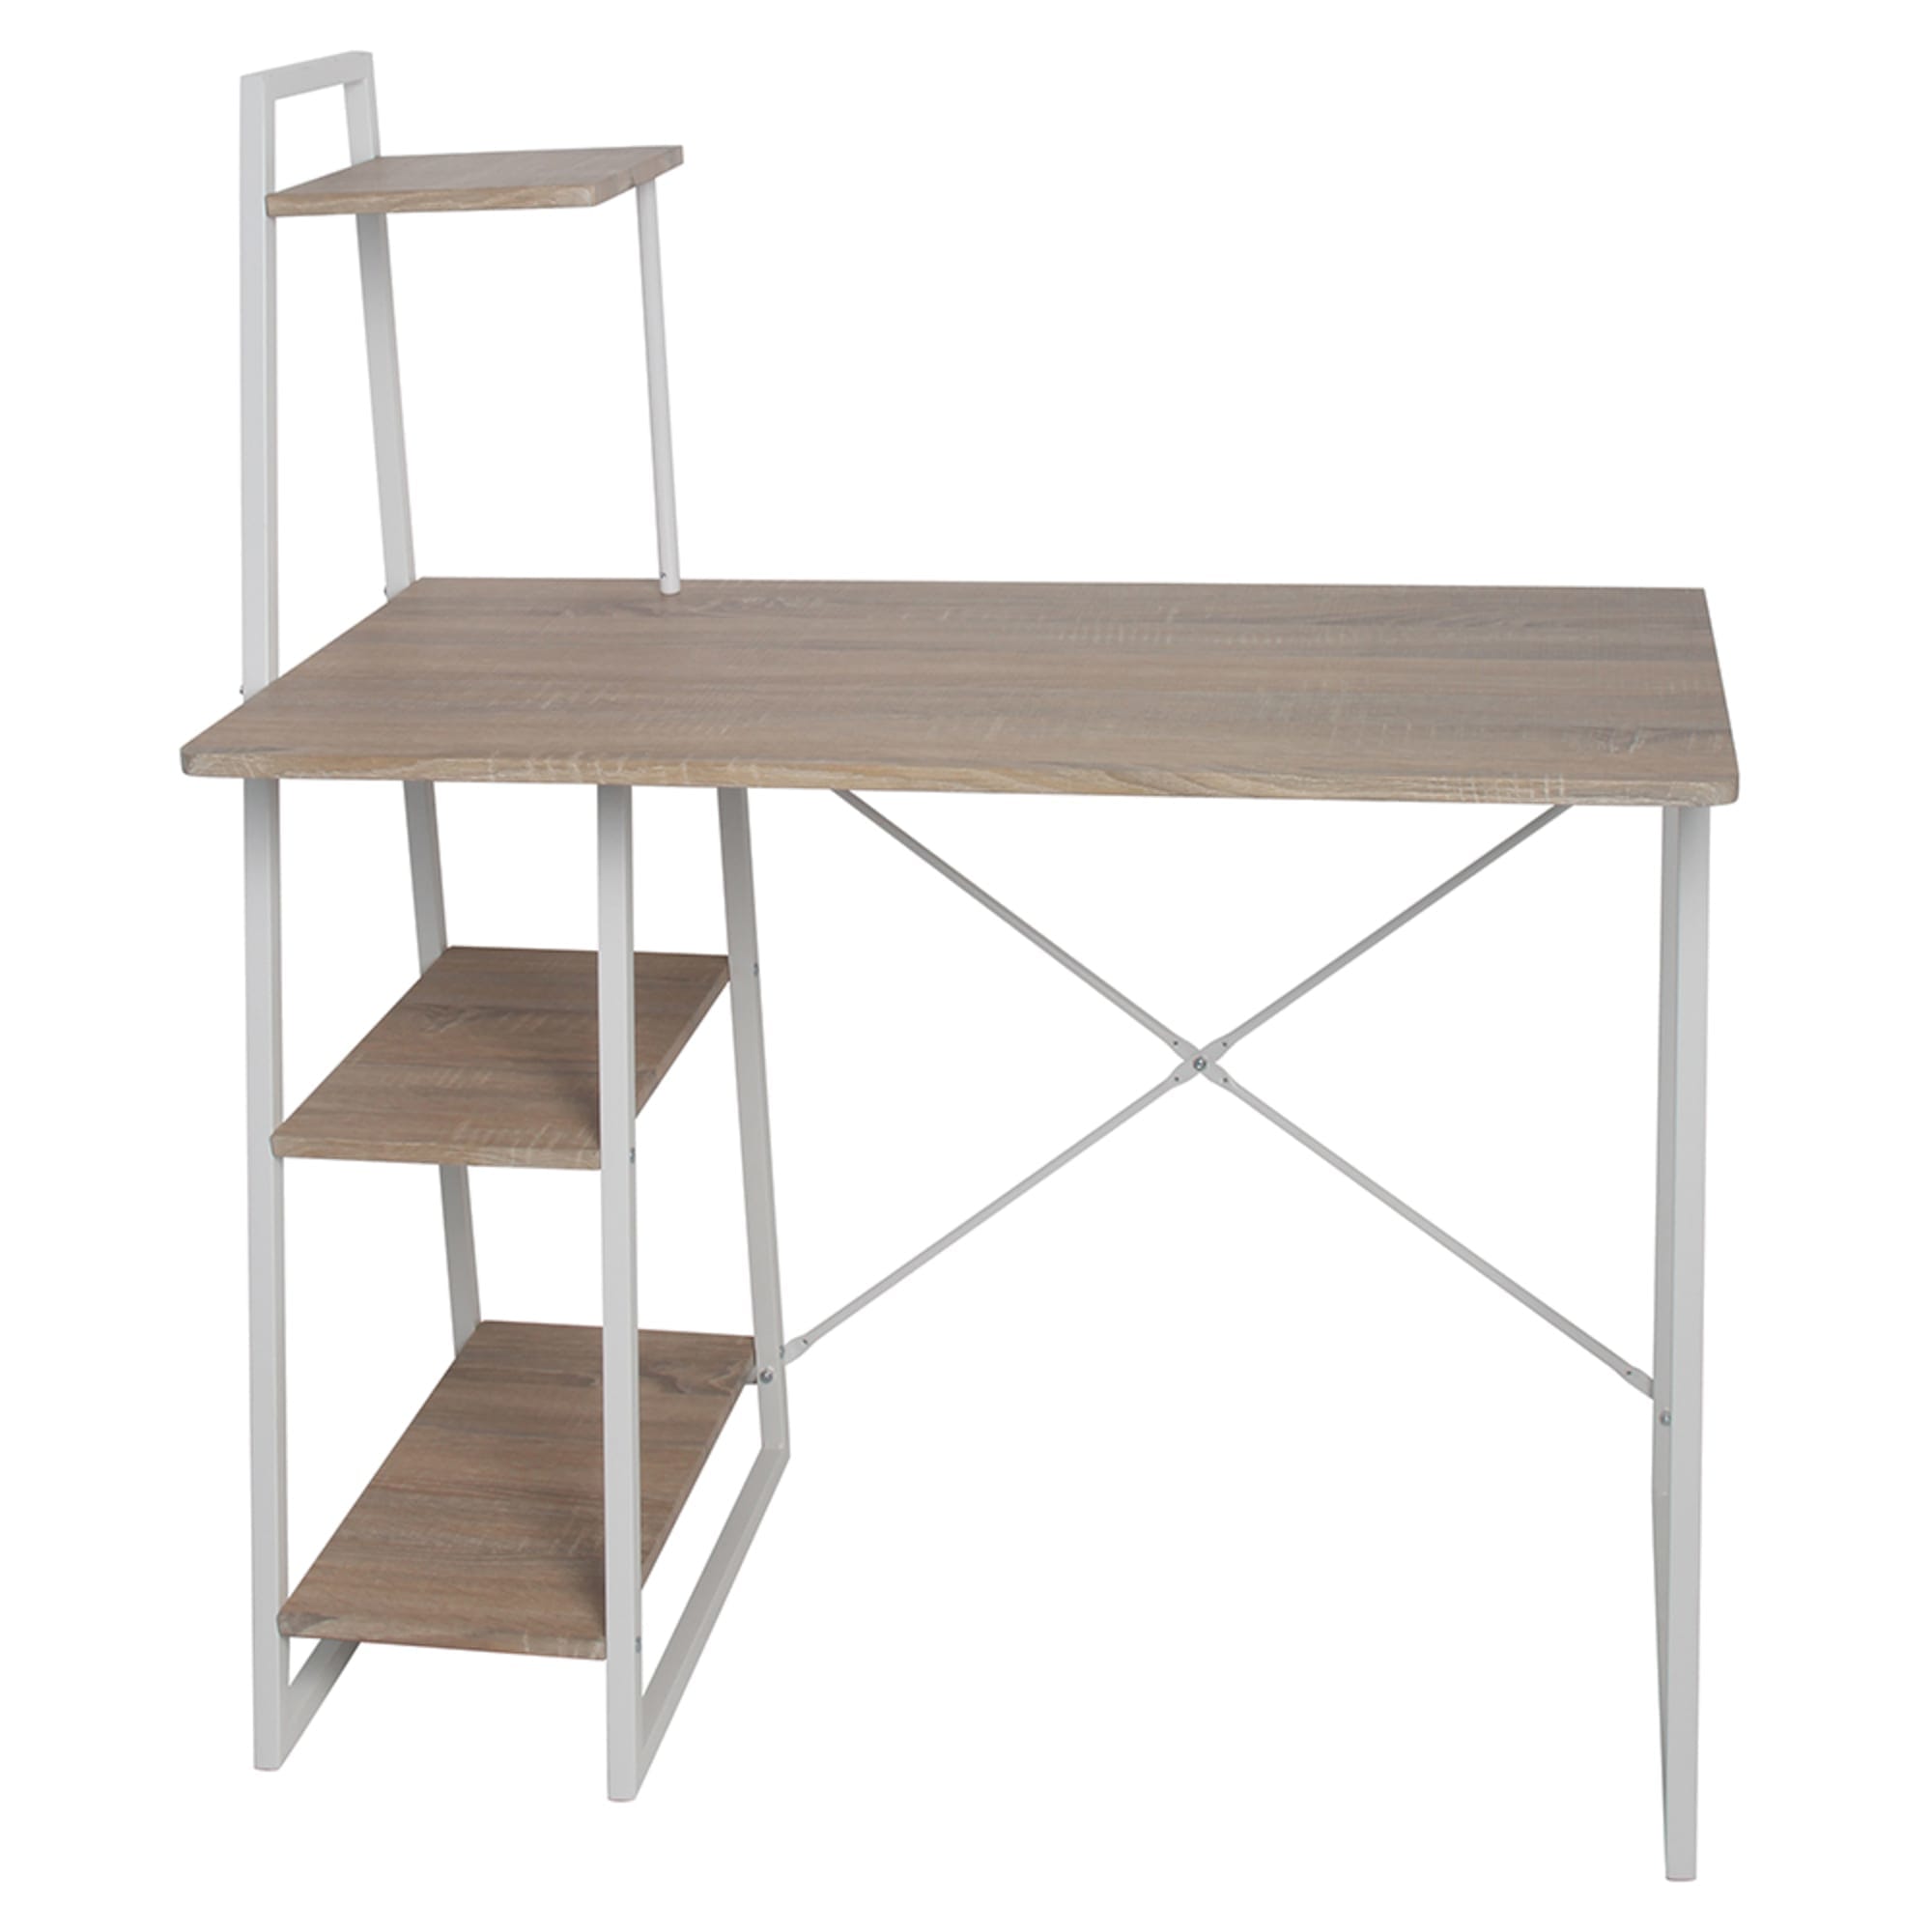 Home Basics Computer Desk With 3 Shelves, Natural $50.00 EACH, CASE PACK OF 1